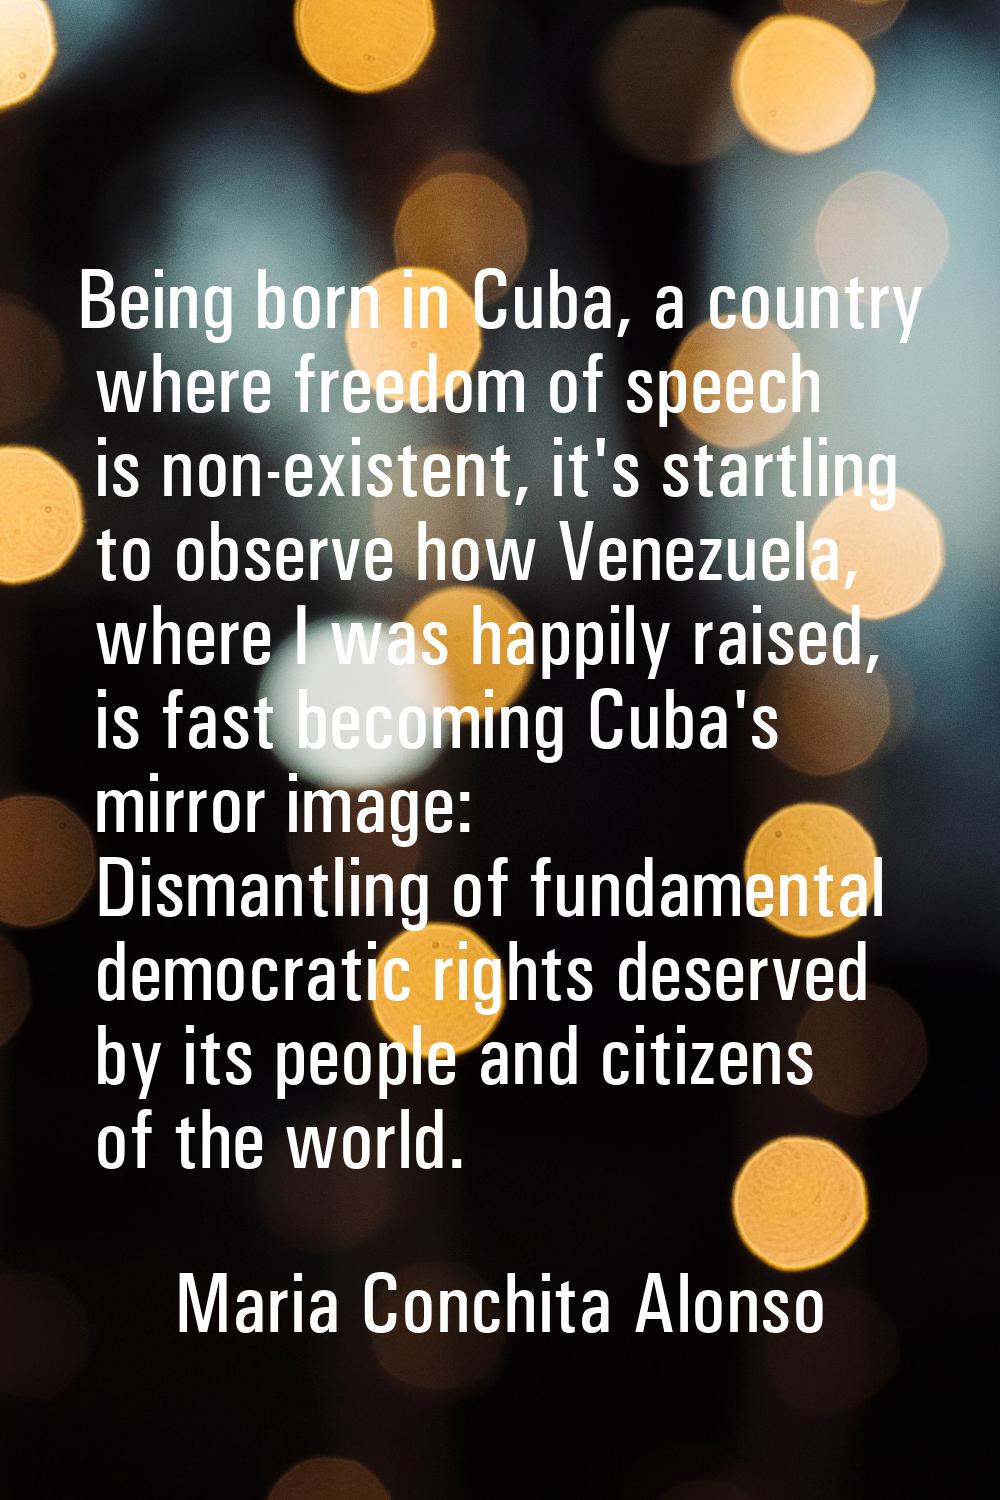 Being born in Cuba, a country where freedom of speech is non-existent, it's startling to observe ho